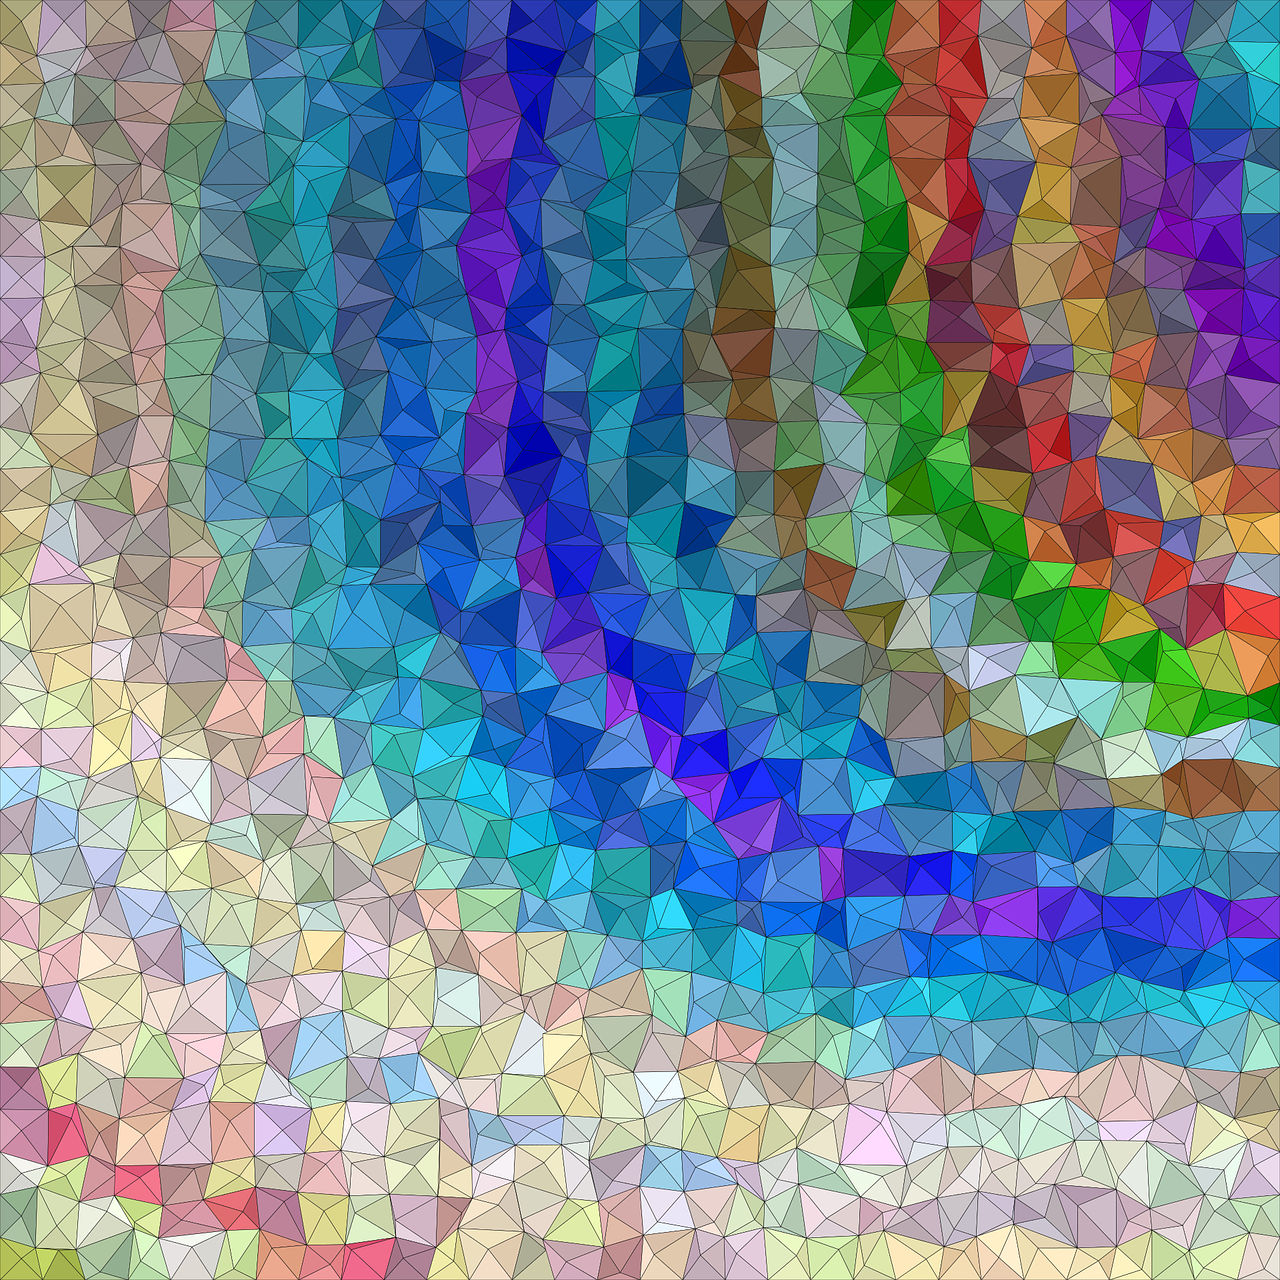 A design of curved lines made up of triangles of different colors and shades.